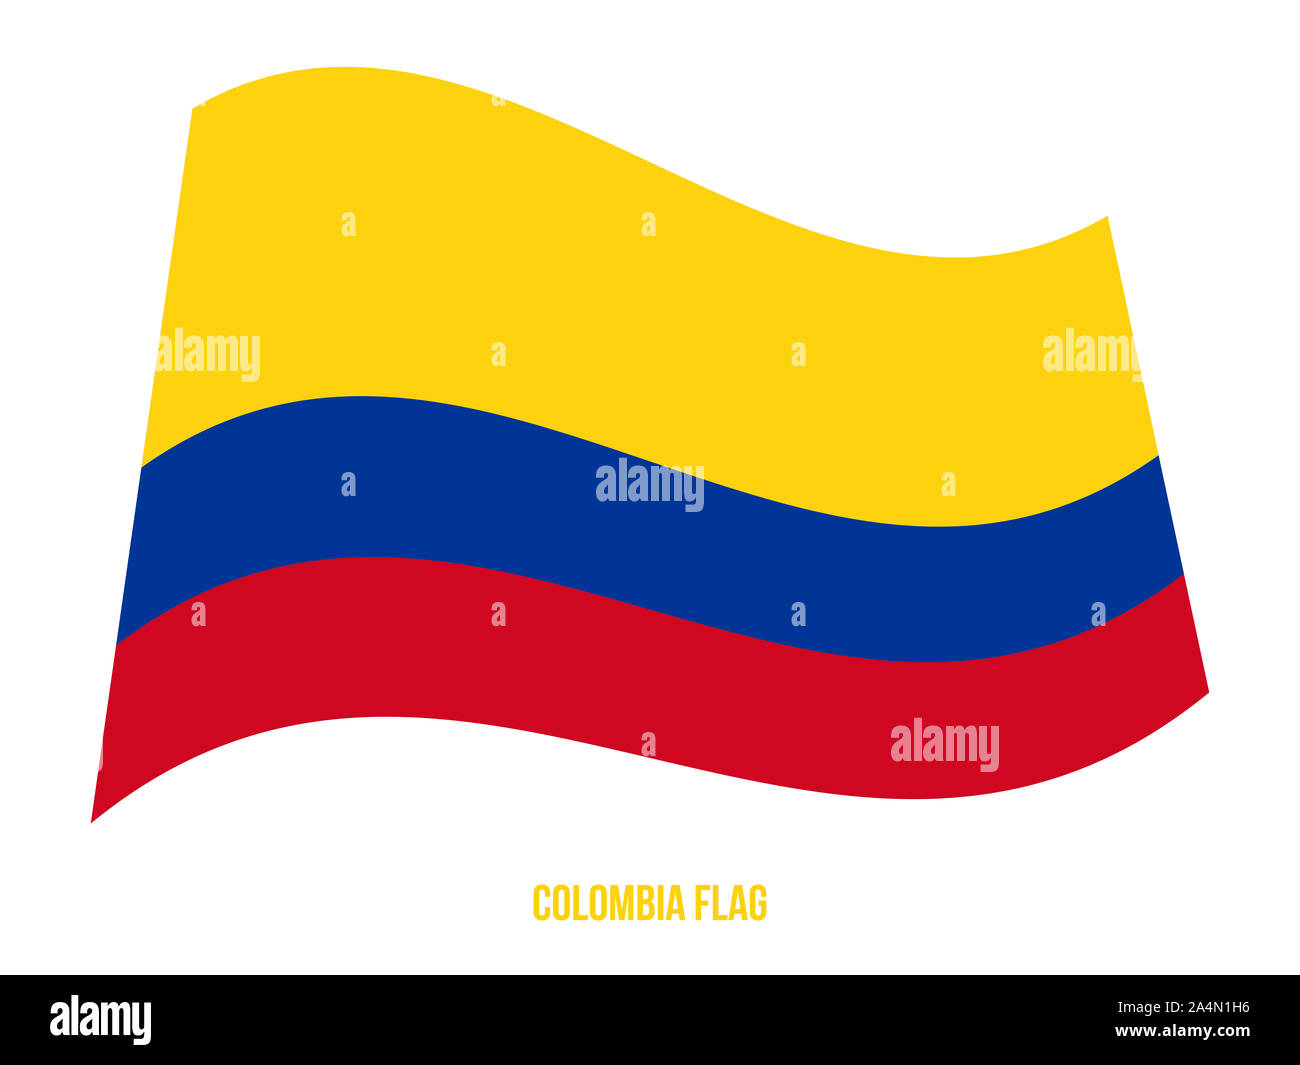 Colombia Flag Waving Vector Illustration on White Background. Colombia National Flag. Stock Photo